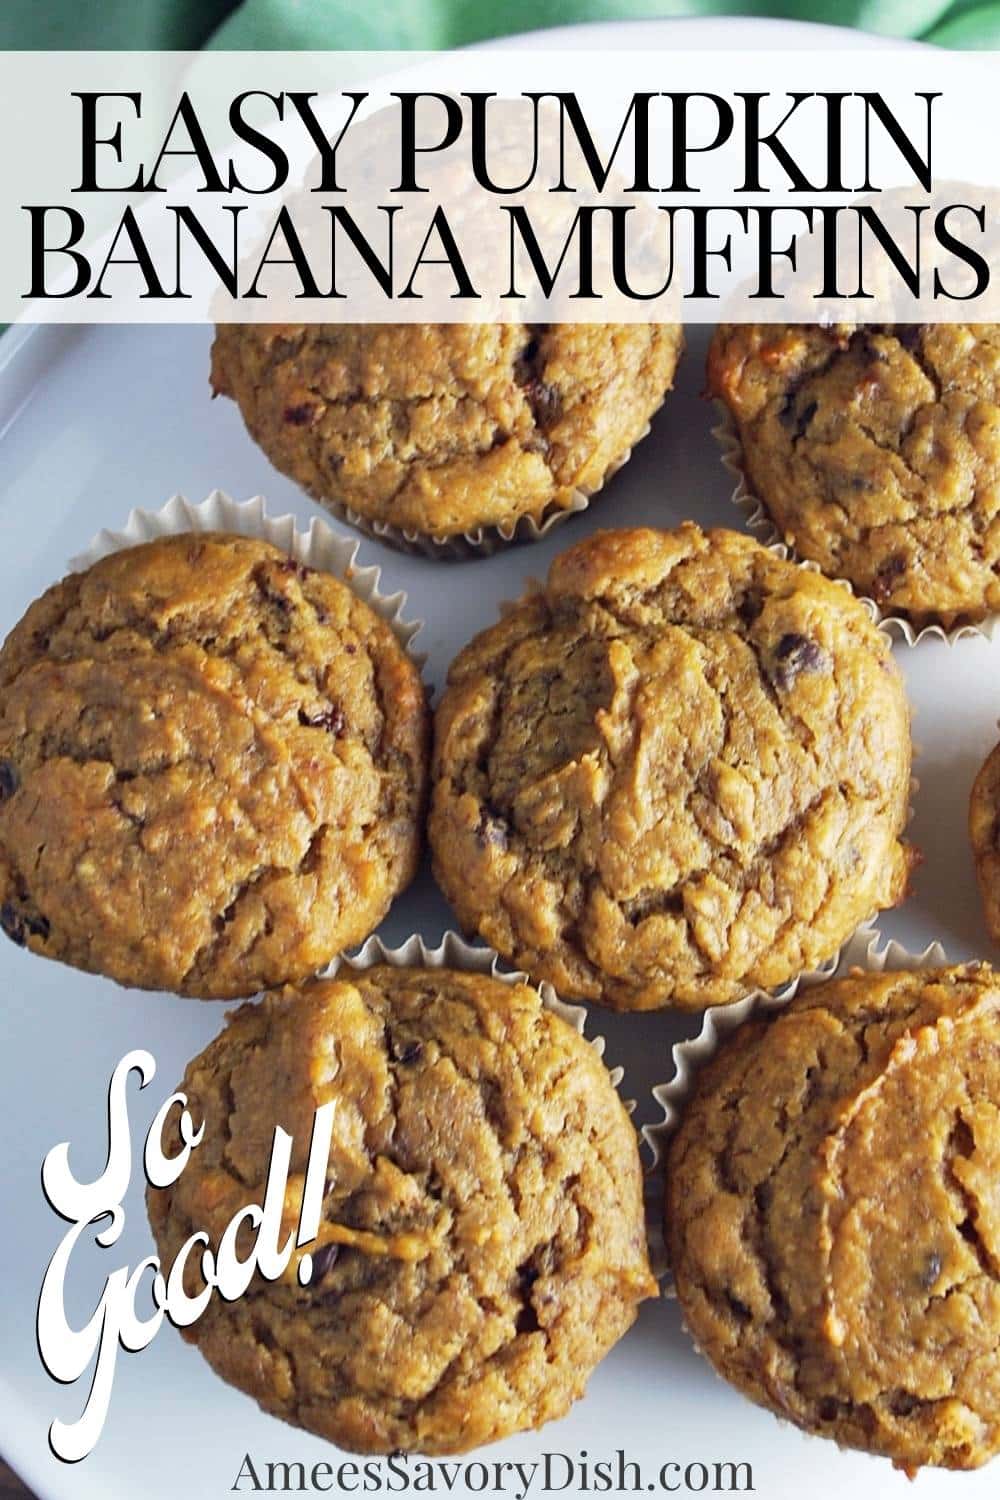  This recipe for pumpkin banana muffins made with whole-grain flour, canned pumpkin, and Greek yogurt is super moist and delicious! via @Ameessavorydish